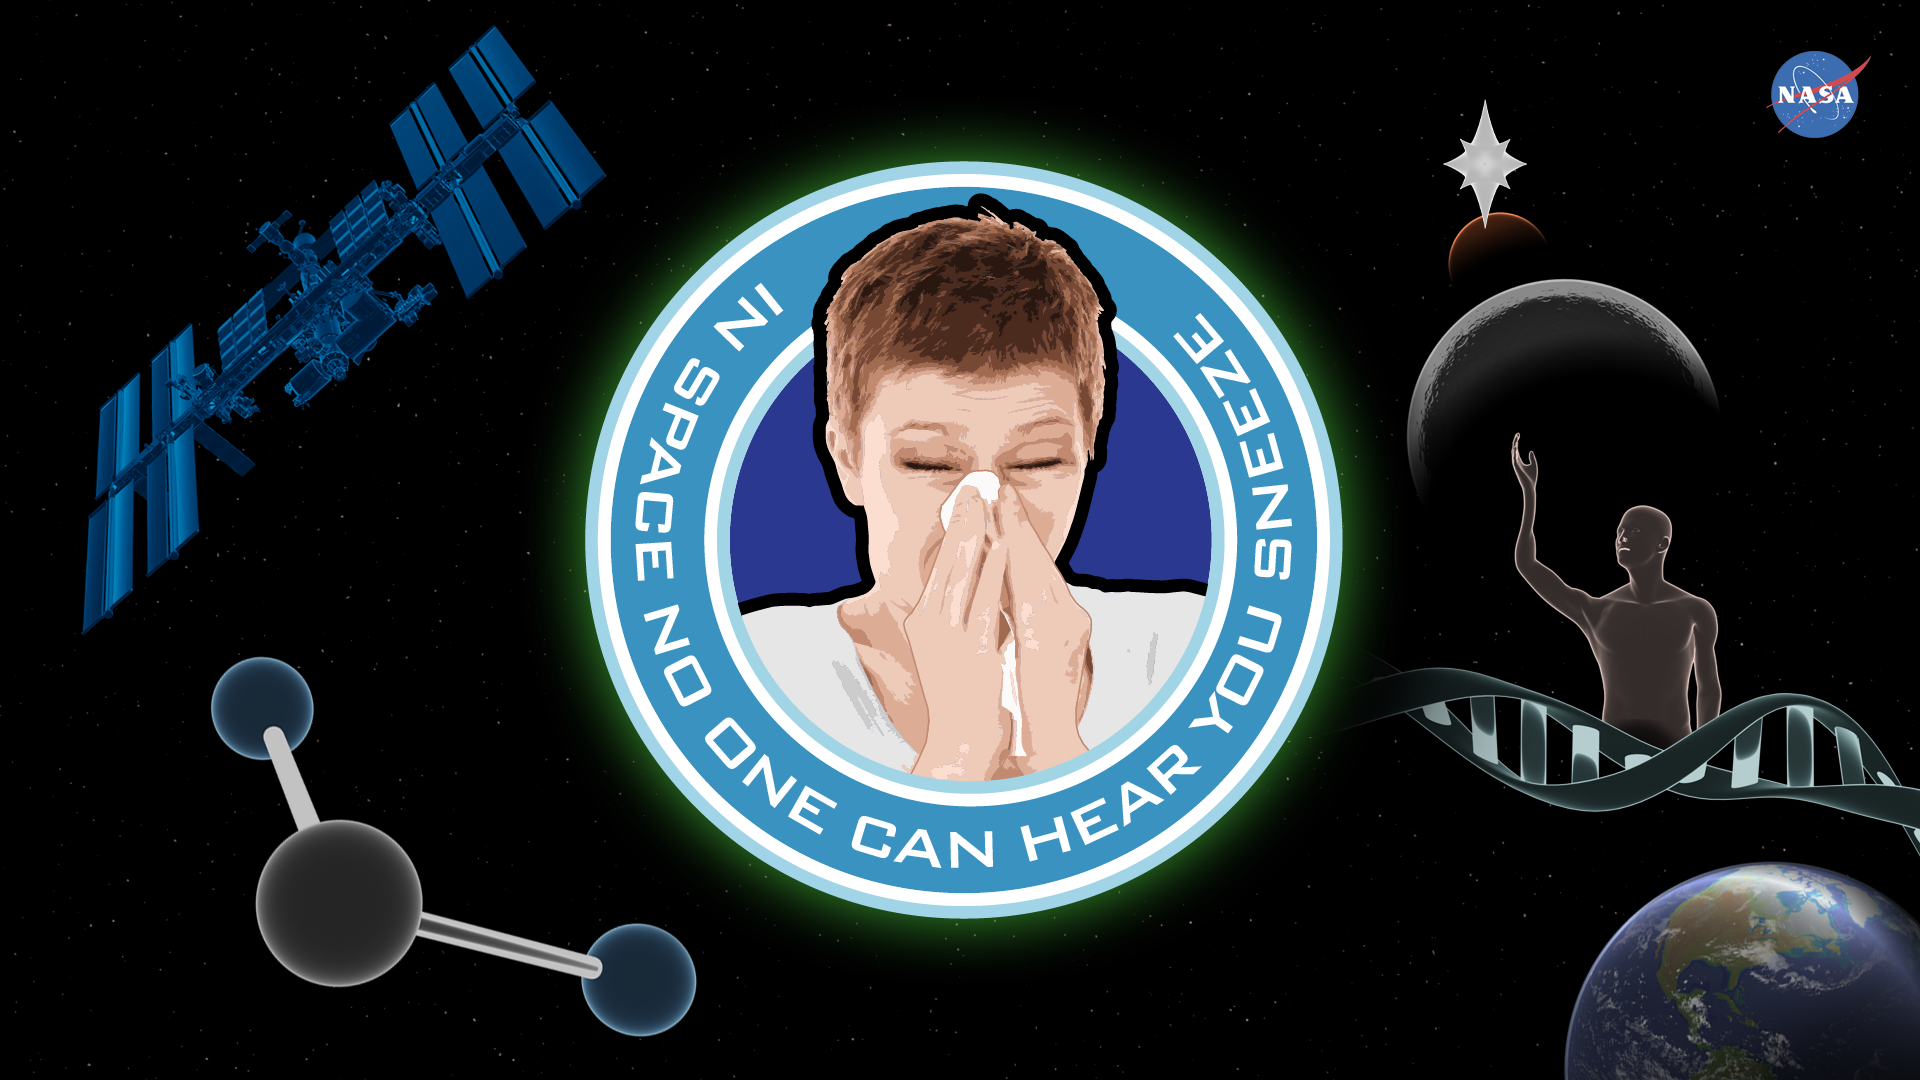 In Space, No One Can Hear You Sneeze